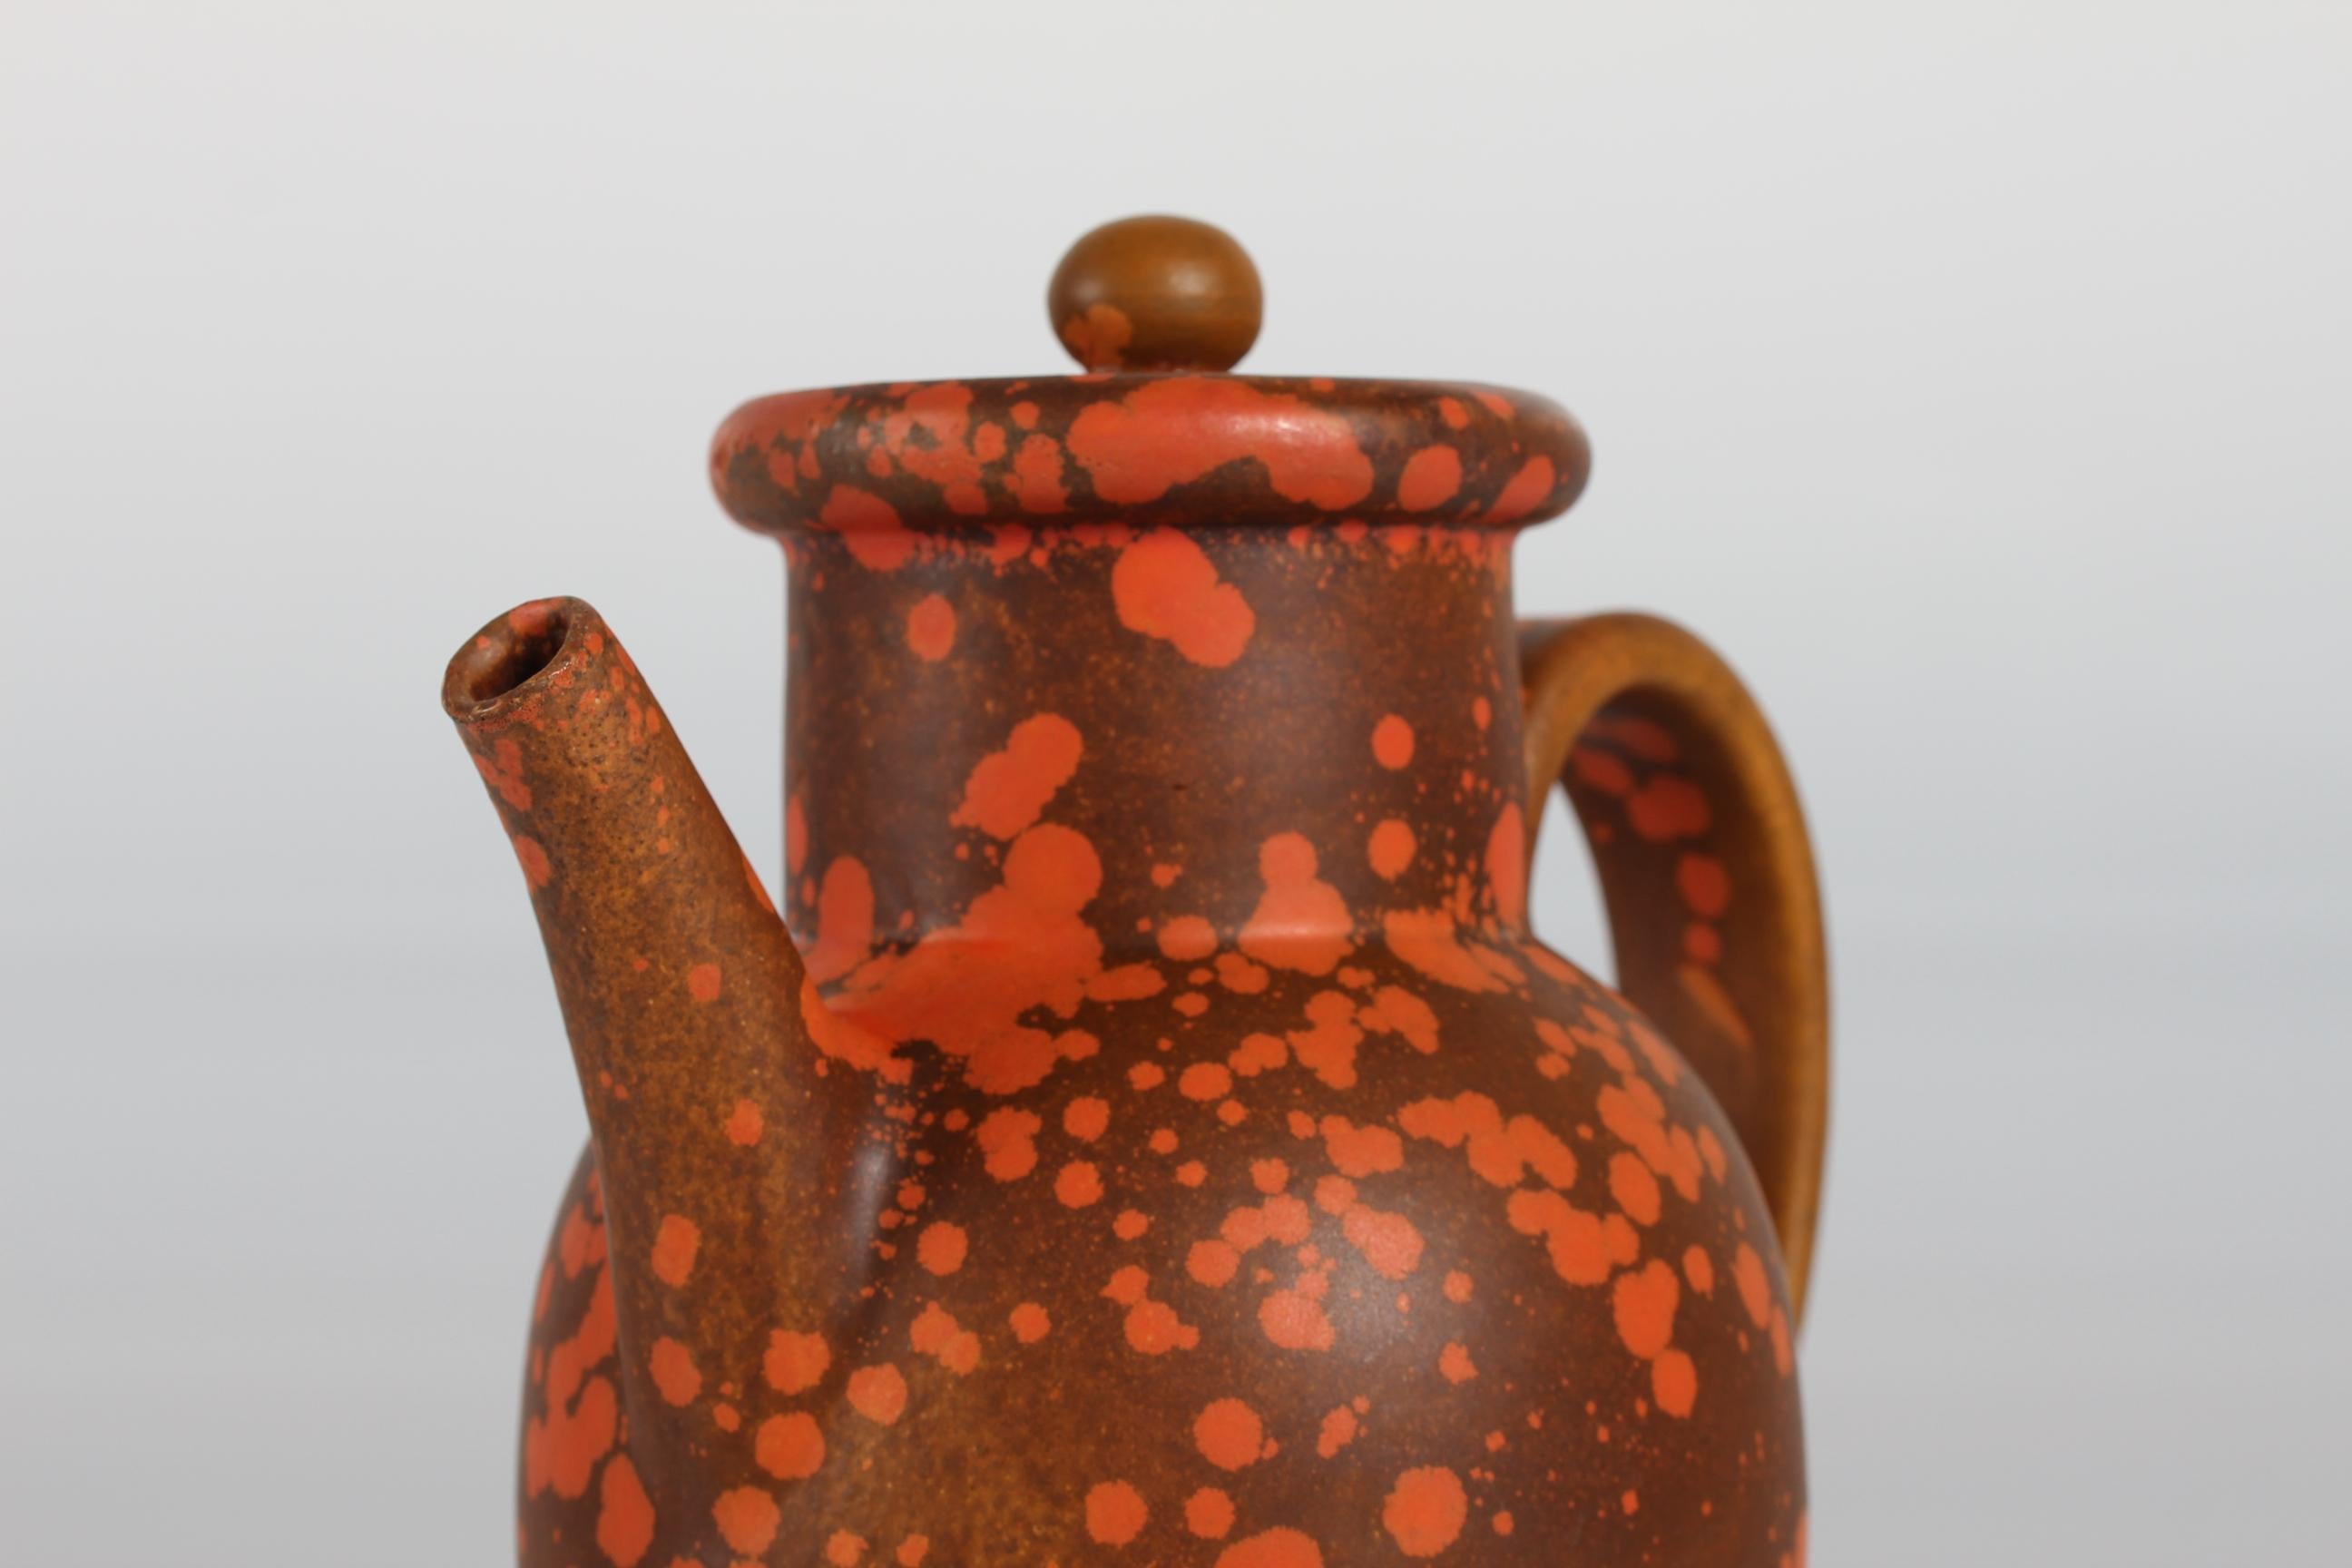 Ceramic coffee pot/pitcher with lid designed by Nils Kähler and manufactured by Herman A. Kählers ceramic workshop 
The coffee pot is decorated with an orange speckled uranium glaze and has the signature HAK + Denmark

Measures: Height 22